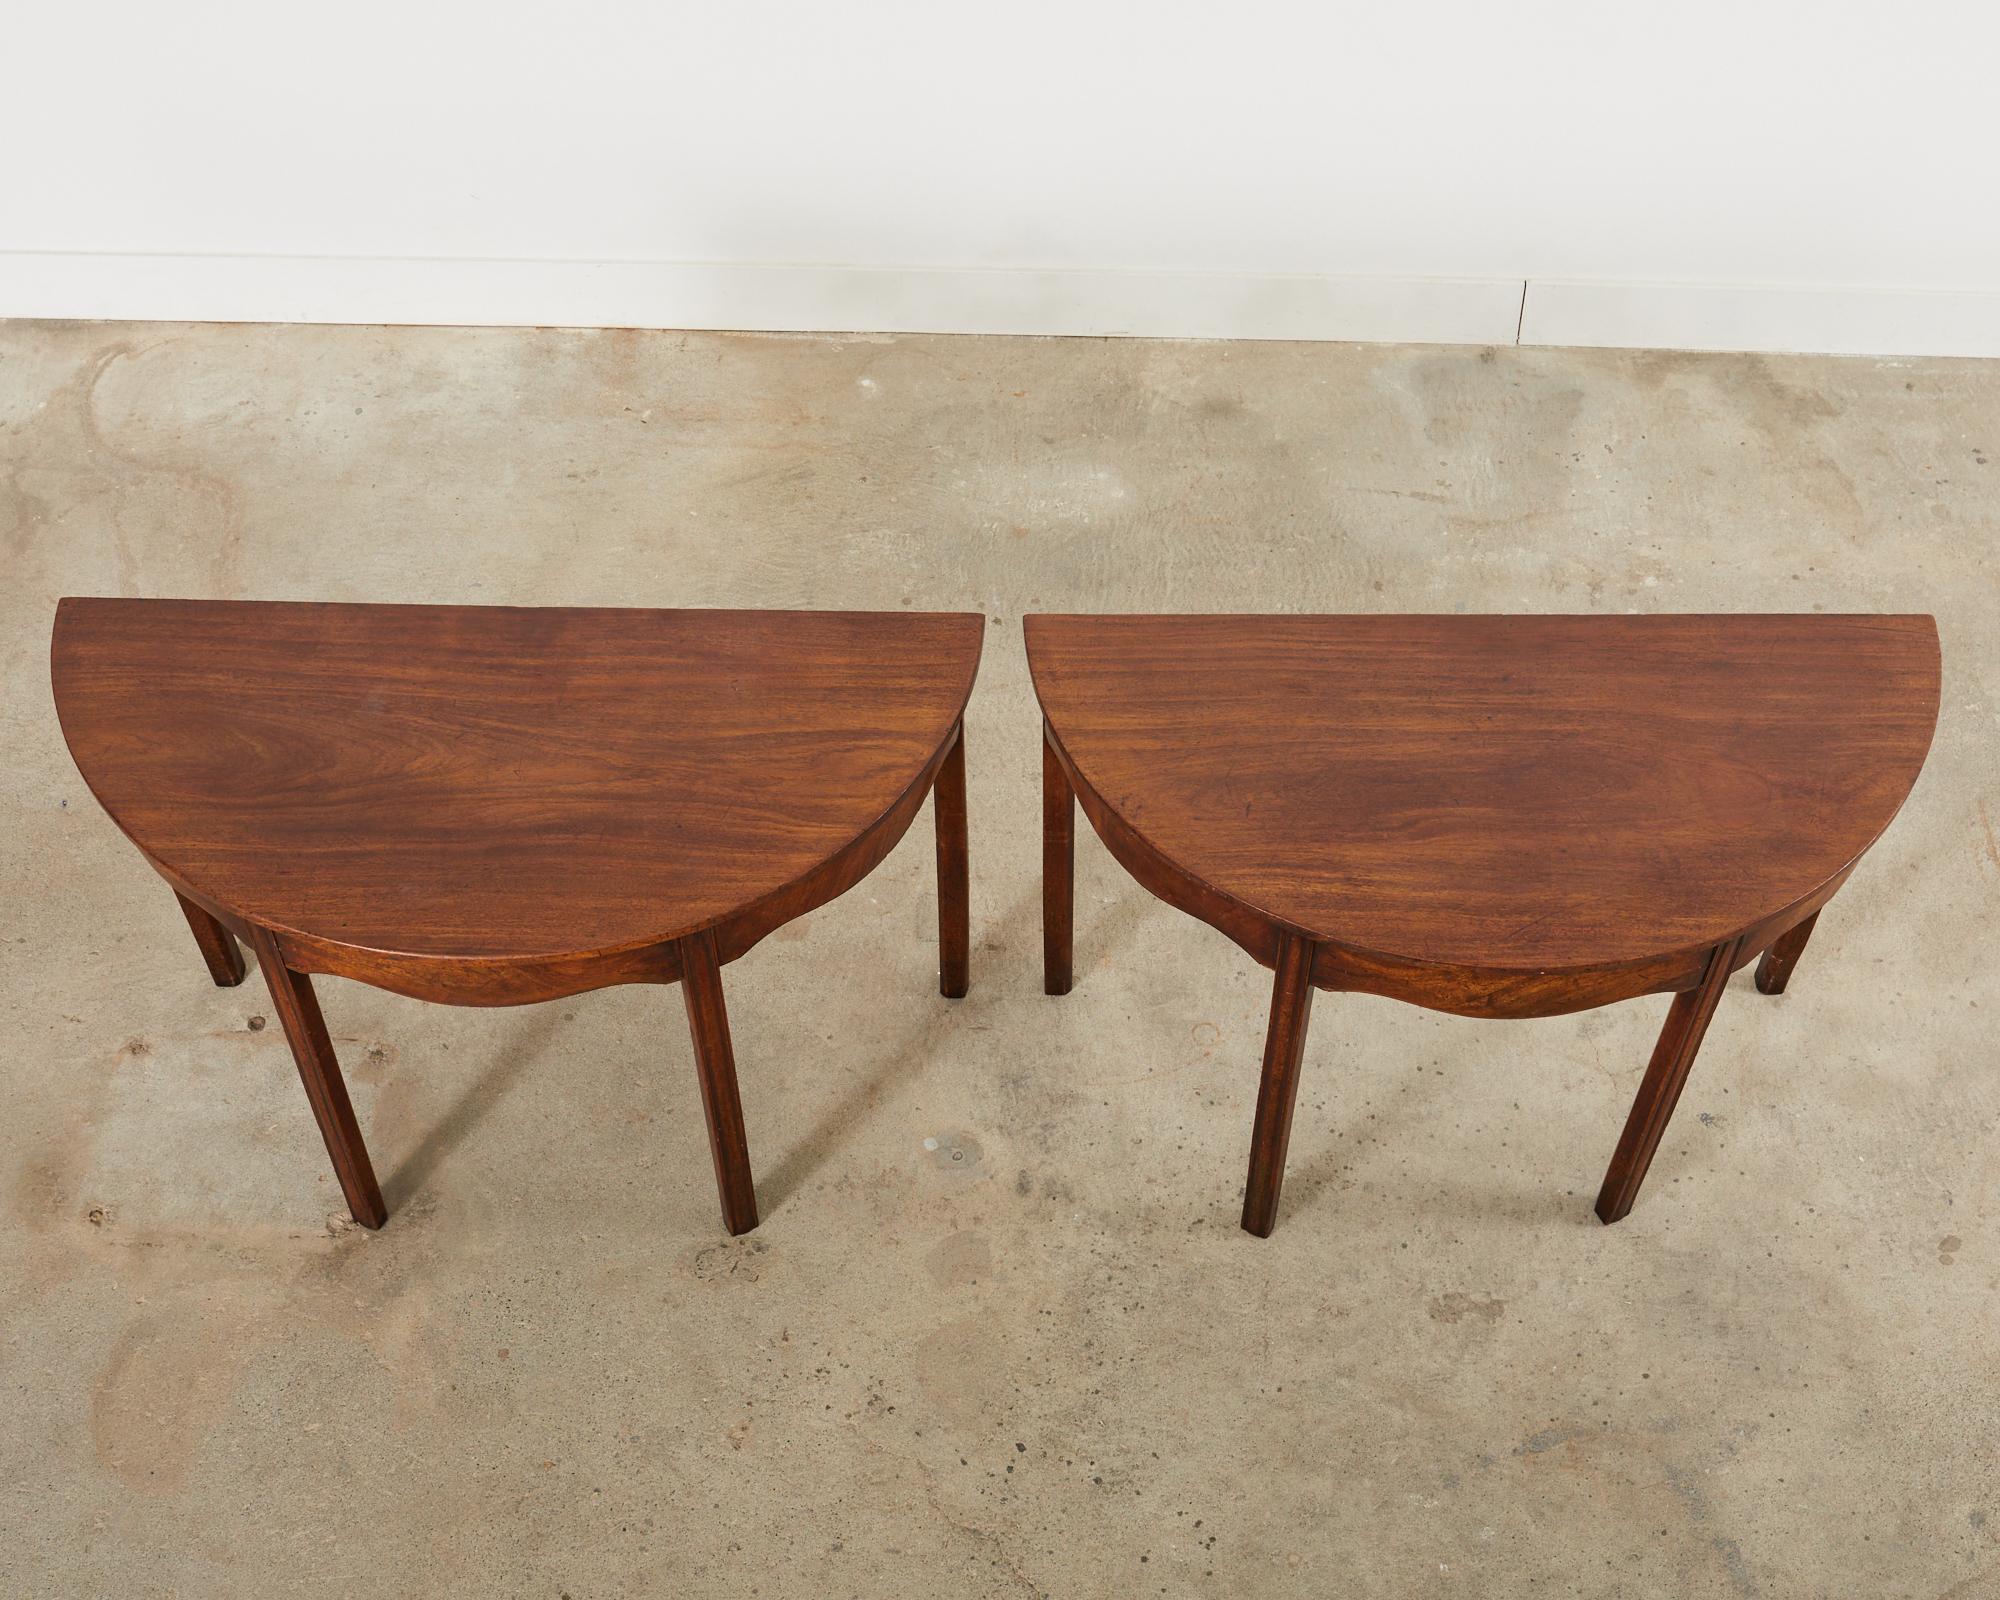 Hand-Crafted Pair of 19th Century Georgian Mahogany Demilune Console Tables 